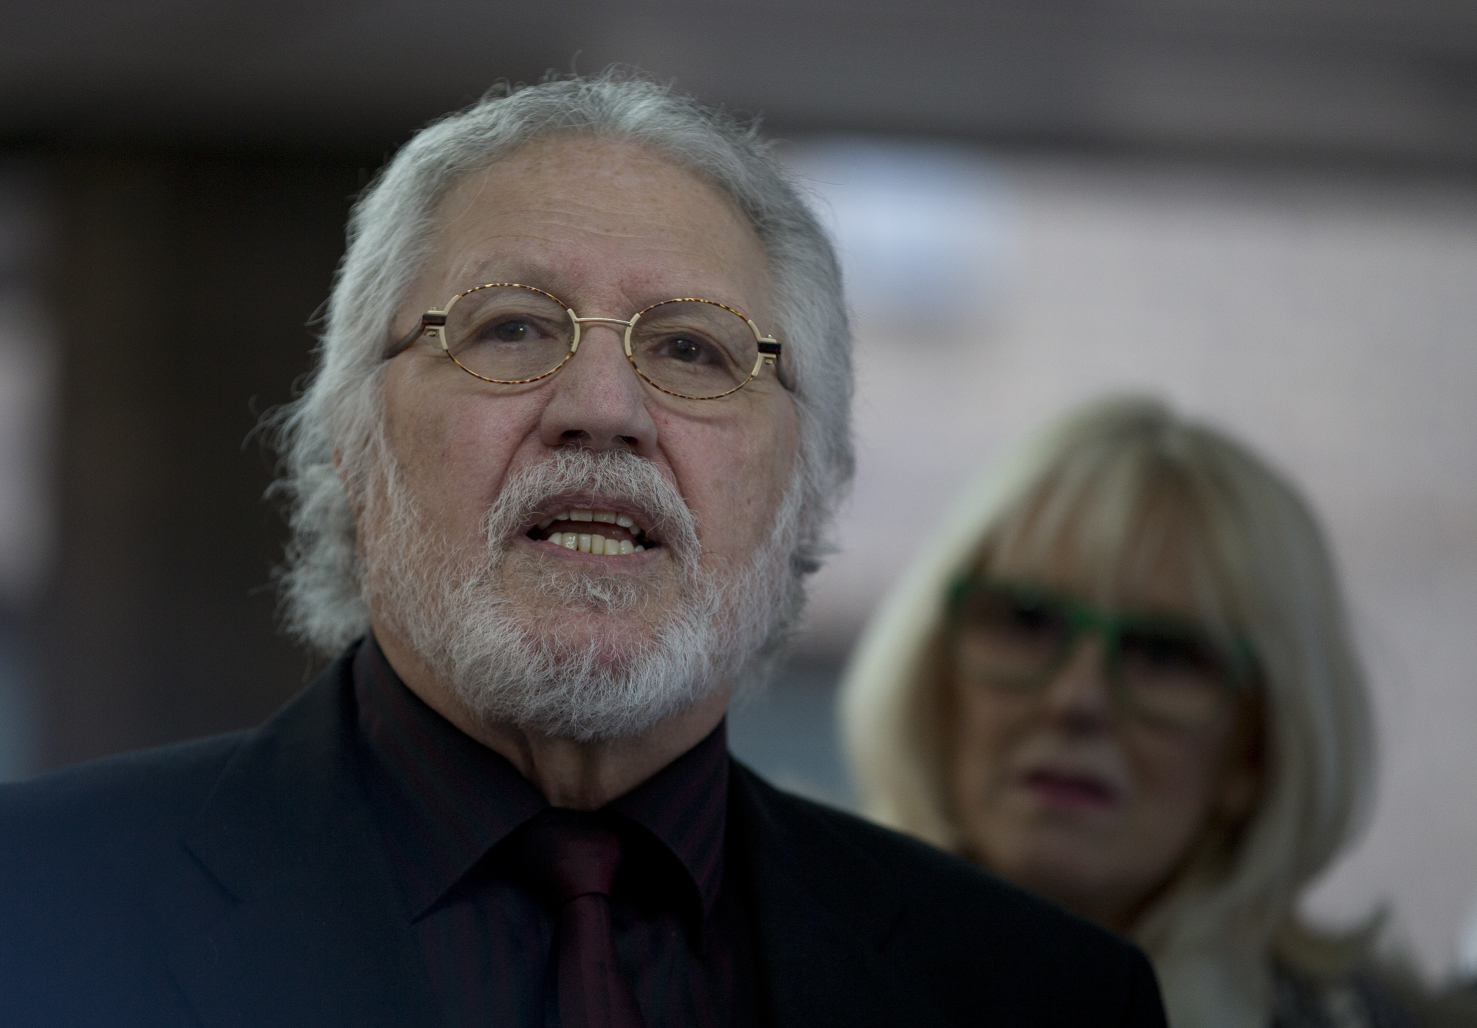 Dave Lee Travis speaks to the media as he leaves court after hearing that he will face a retrial over allegations he sexually assaulted two women. Photo: AP